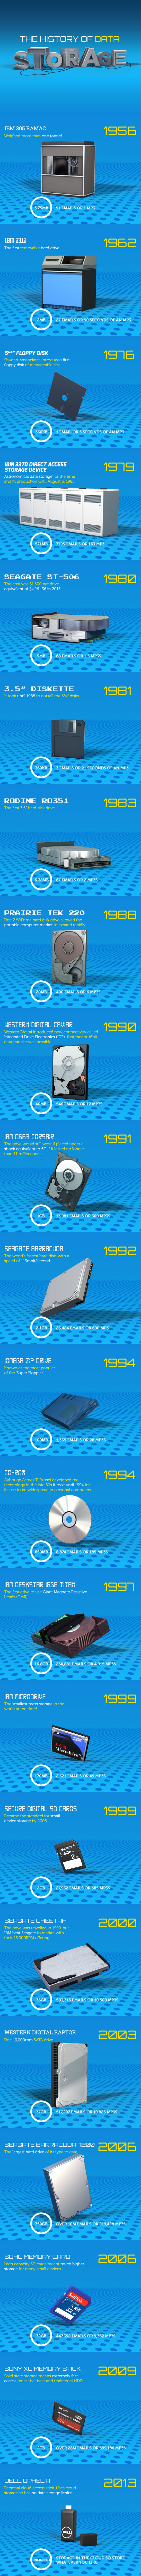 The History of Data Storage